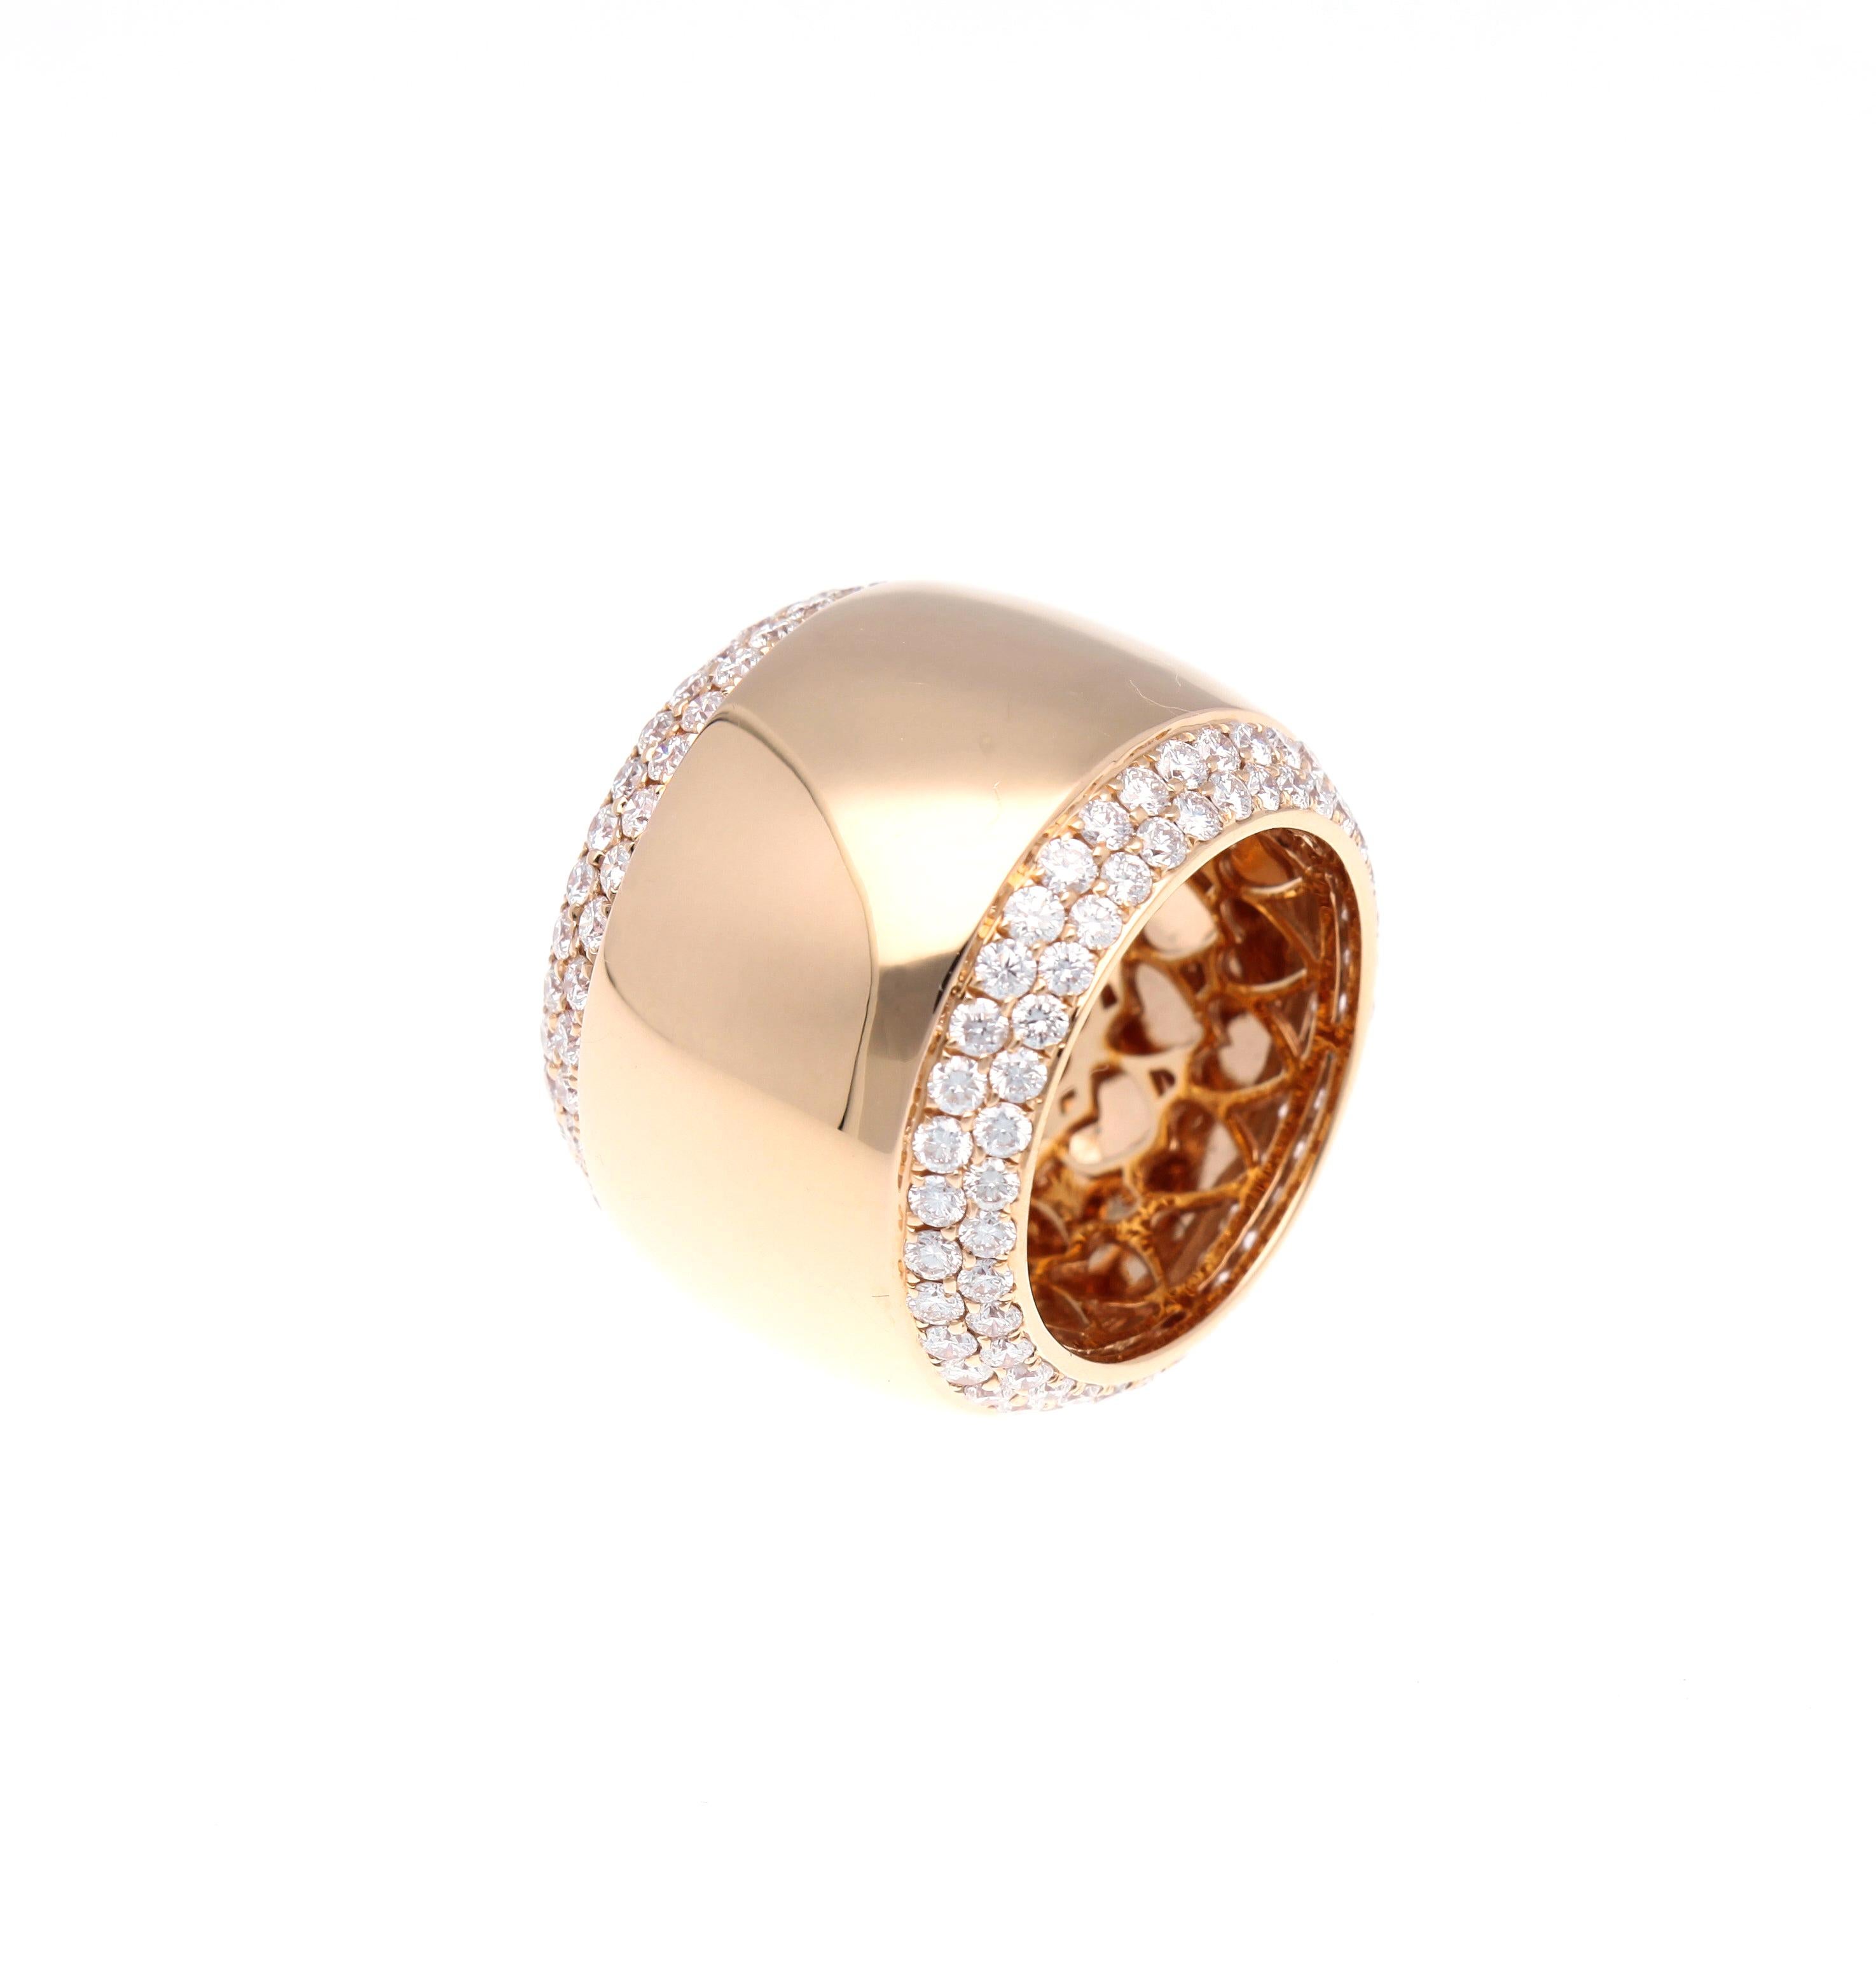 18 Karat Rose Gold Band Ring with Diamonds Total Weight 3.39 Carat For Sale 1